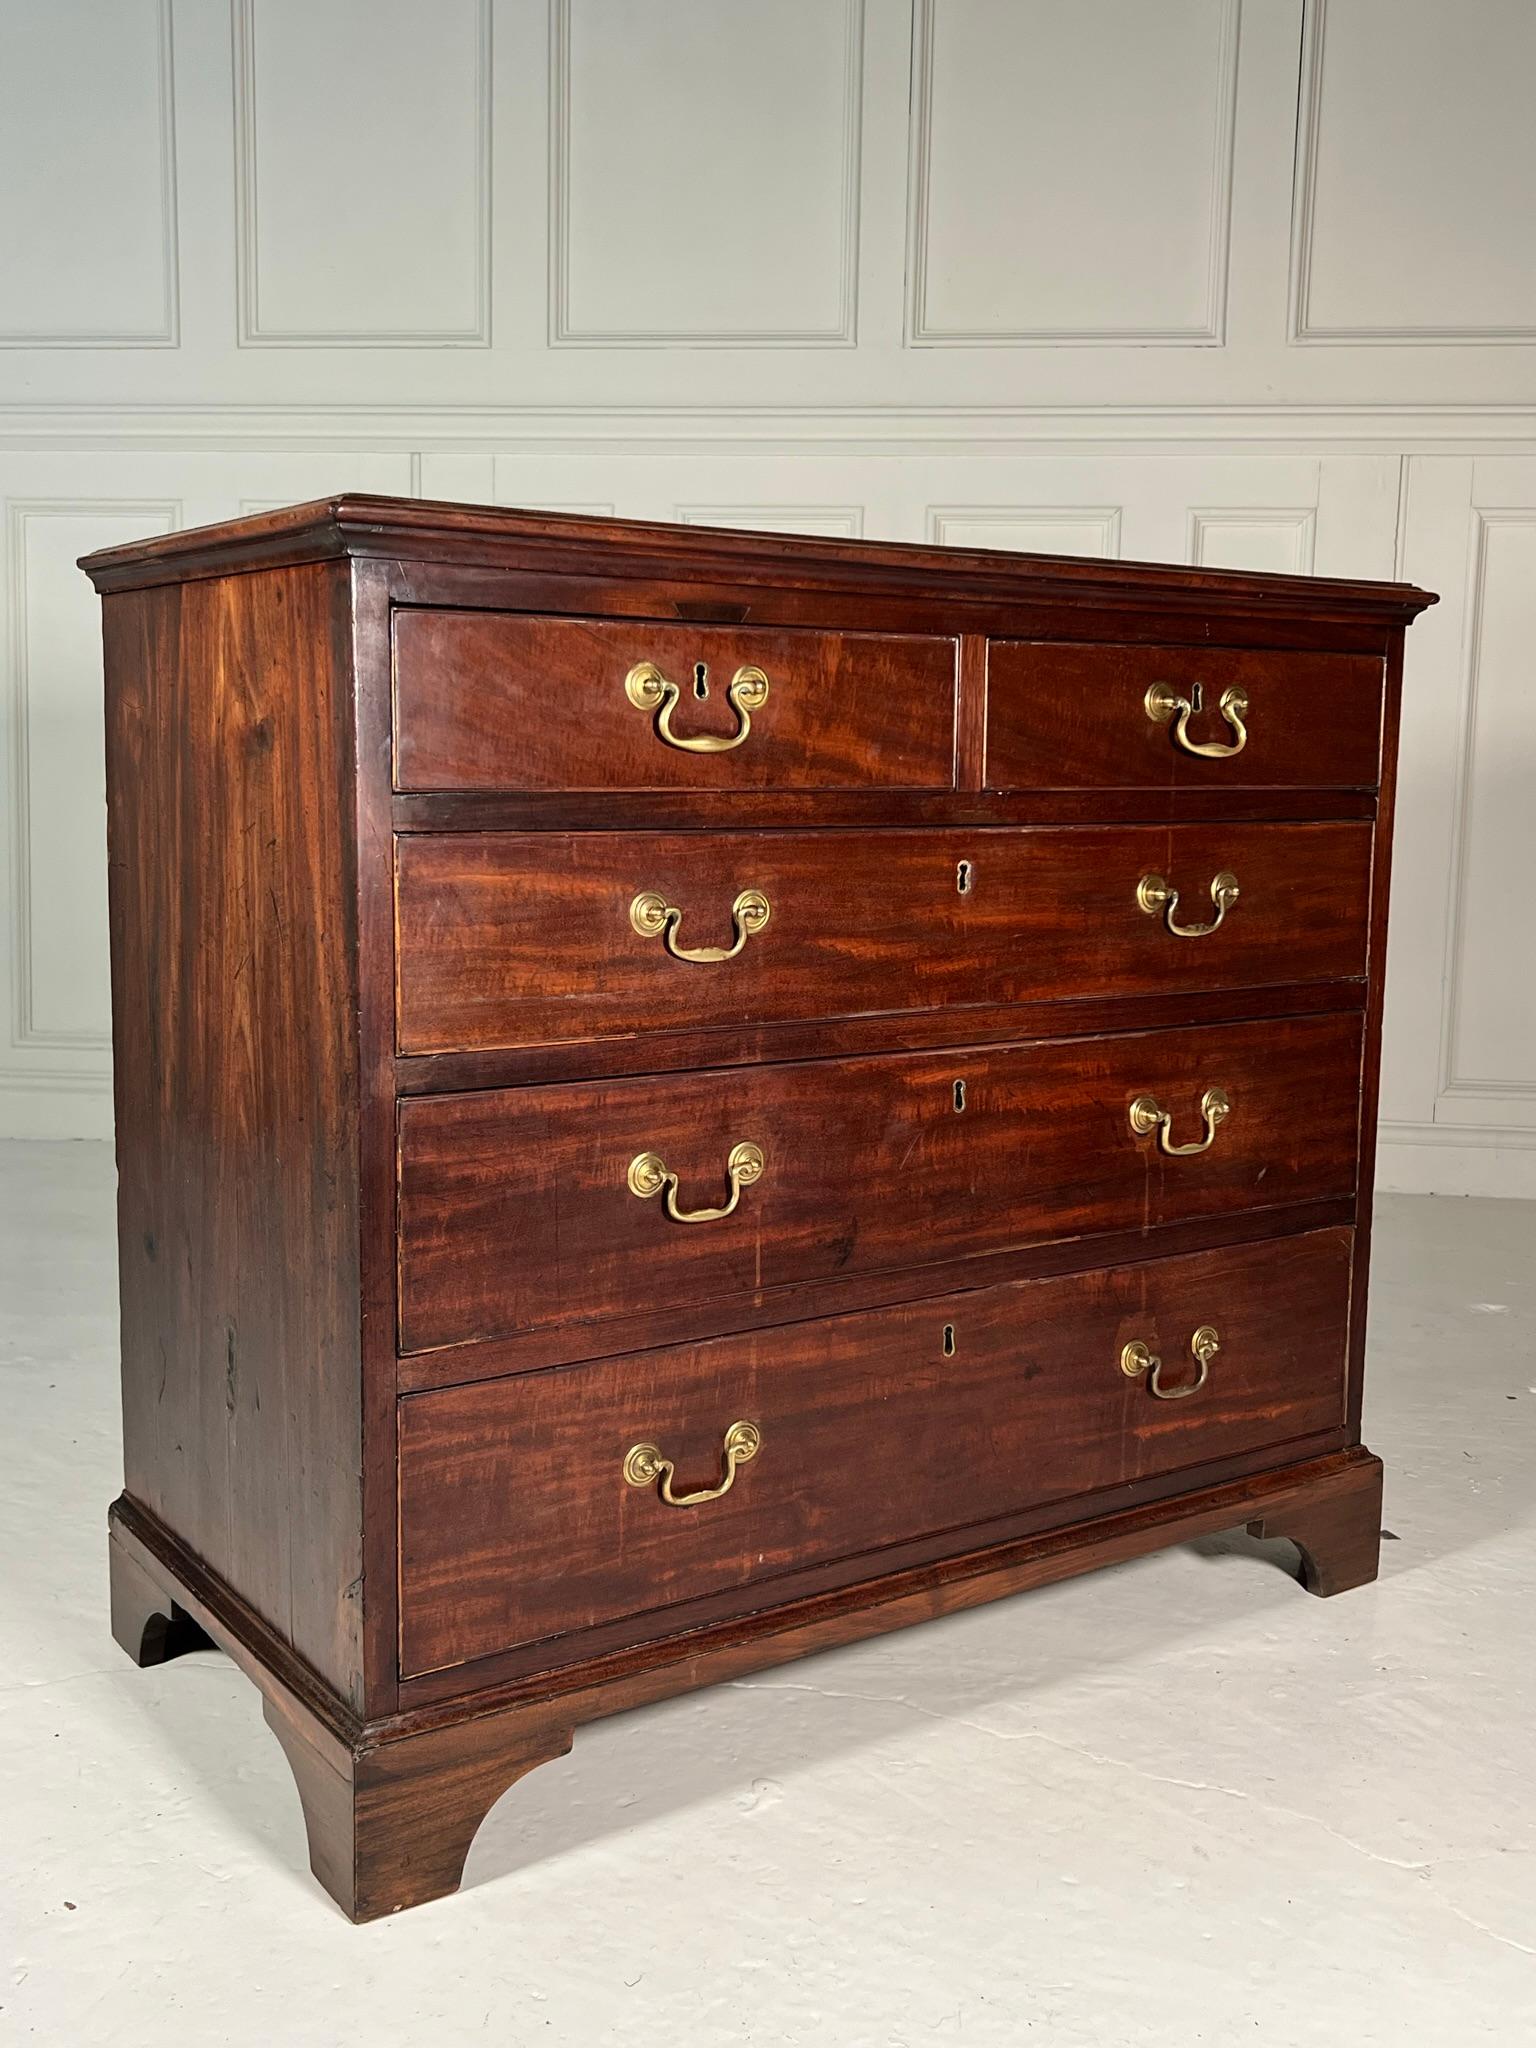 Late 19th century Georgian revival chest of drawers.

Well proportioned mahogany chest with crossbanded top above 5 cock-beaded drawers raised on bracket feet.

An excellent quality chest.

A slight watermark to the front as